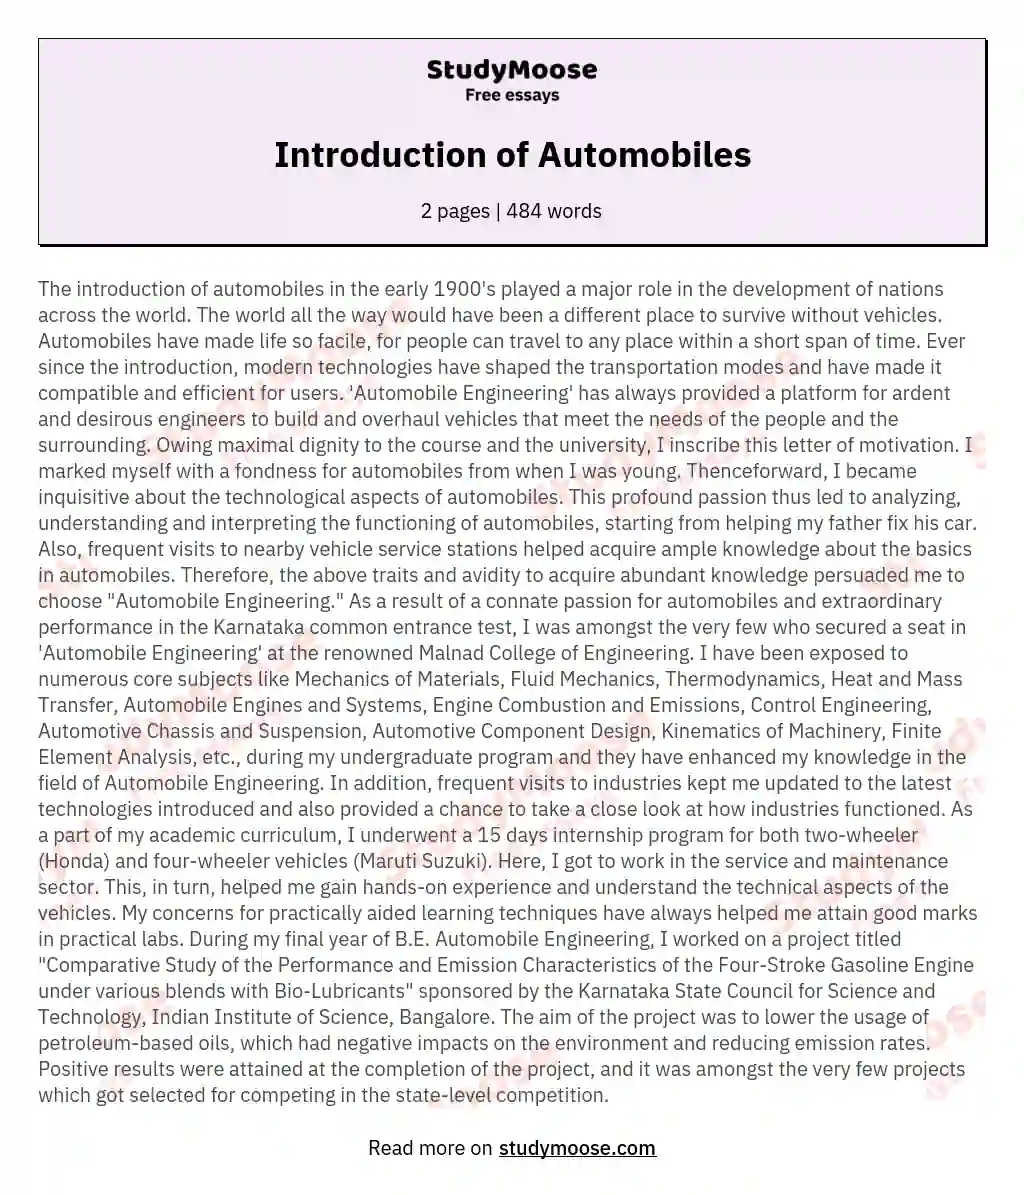 Introduction of Automobiles essay